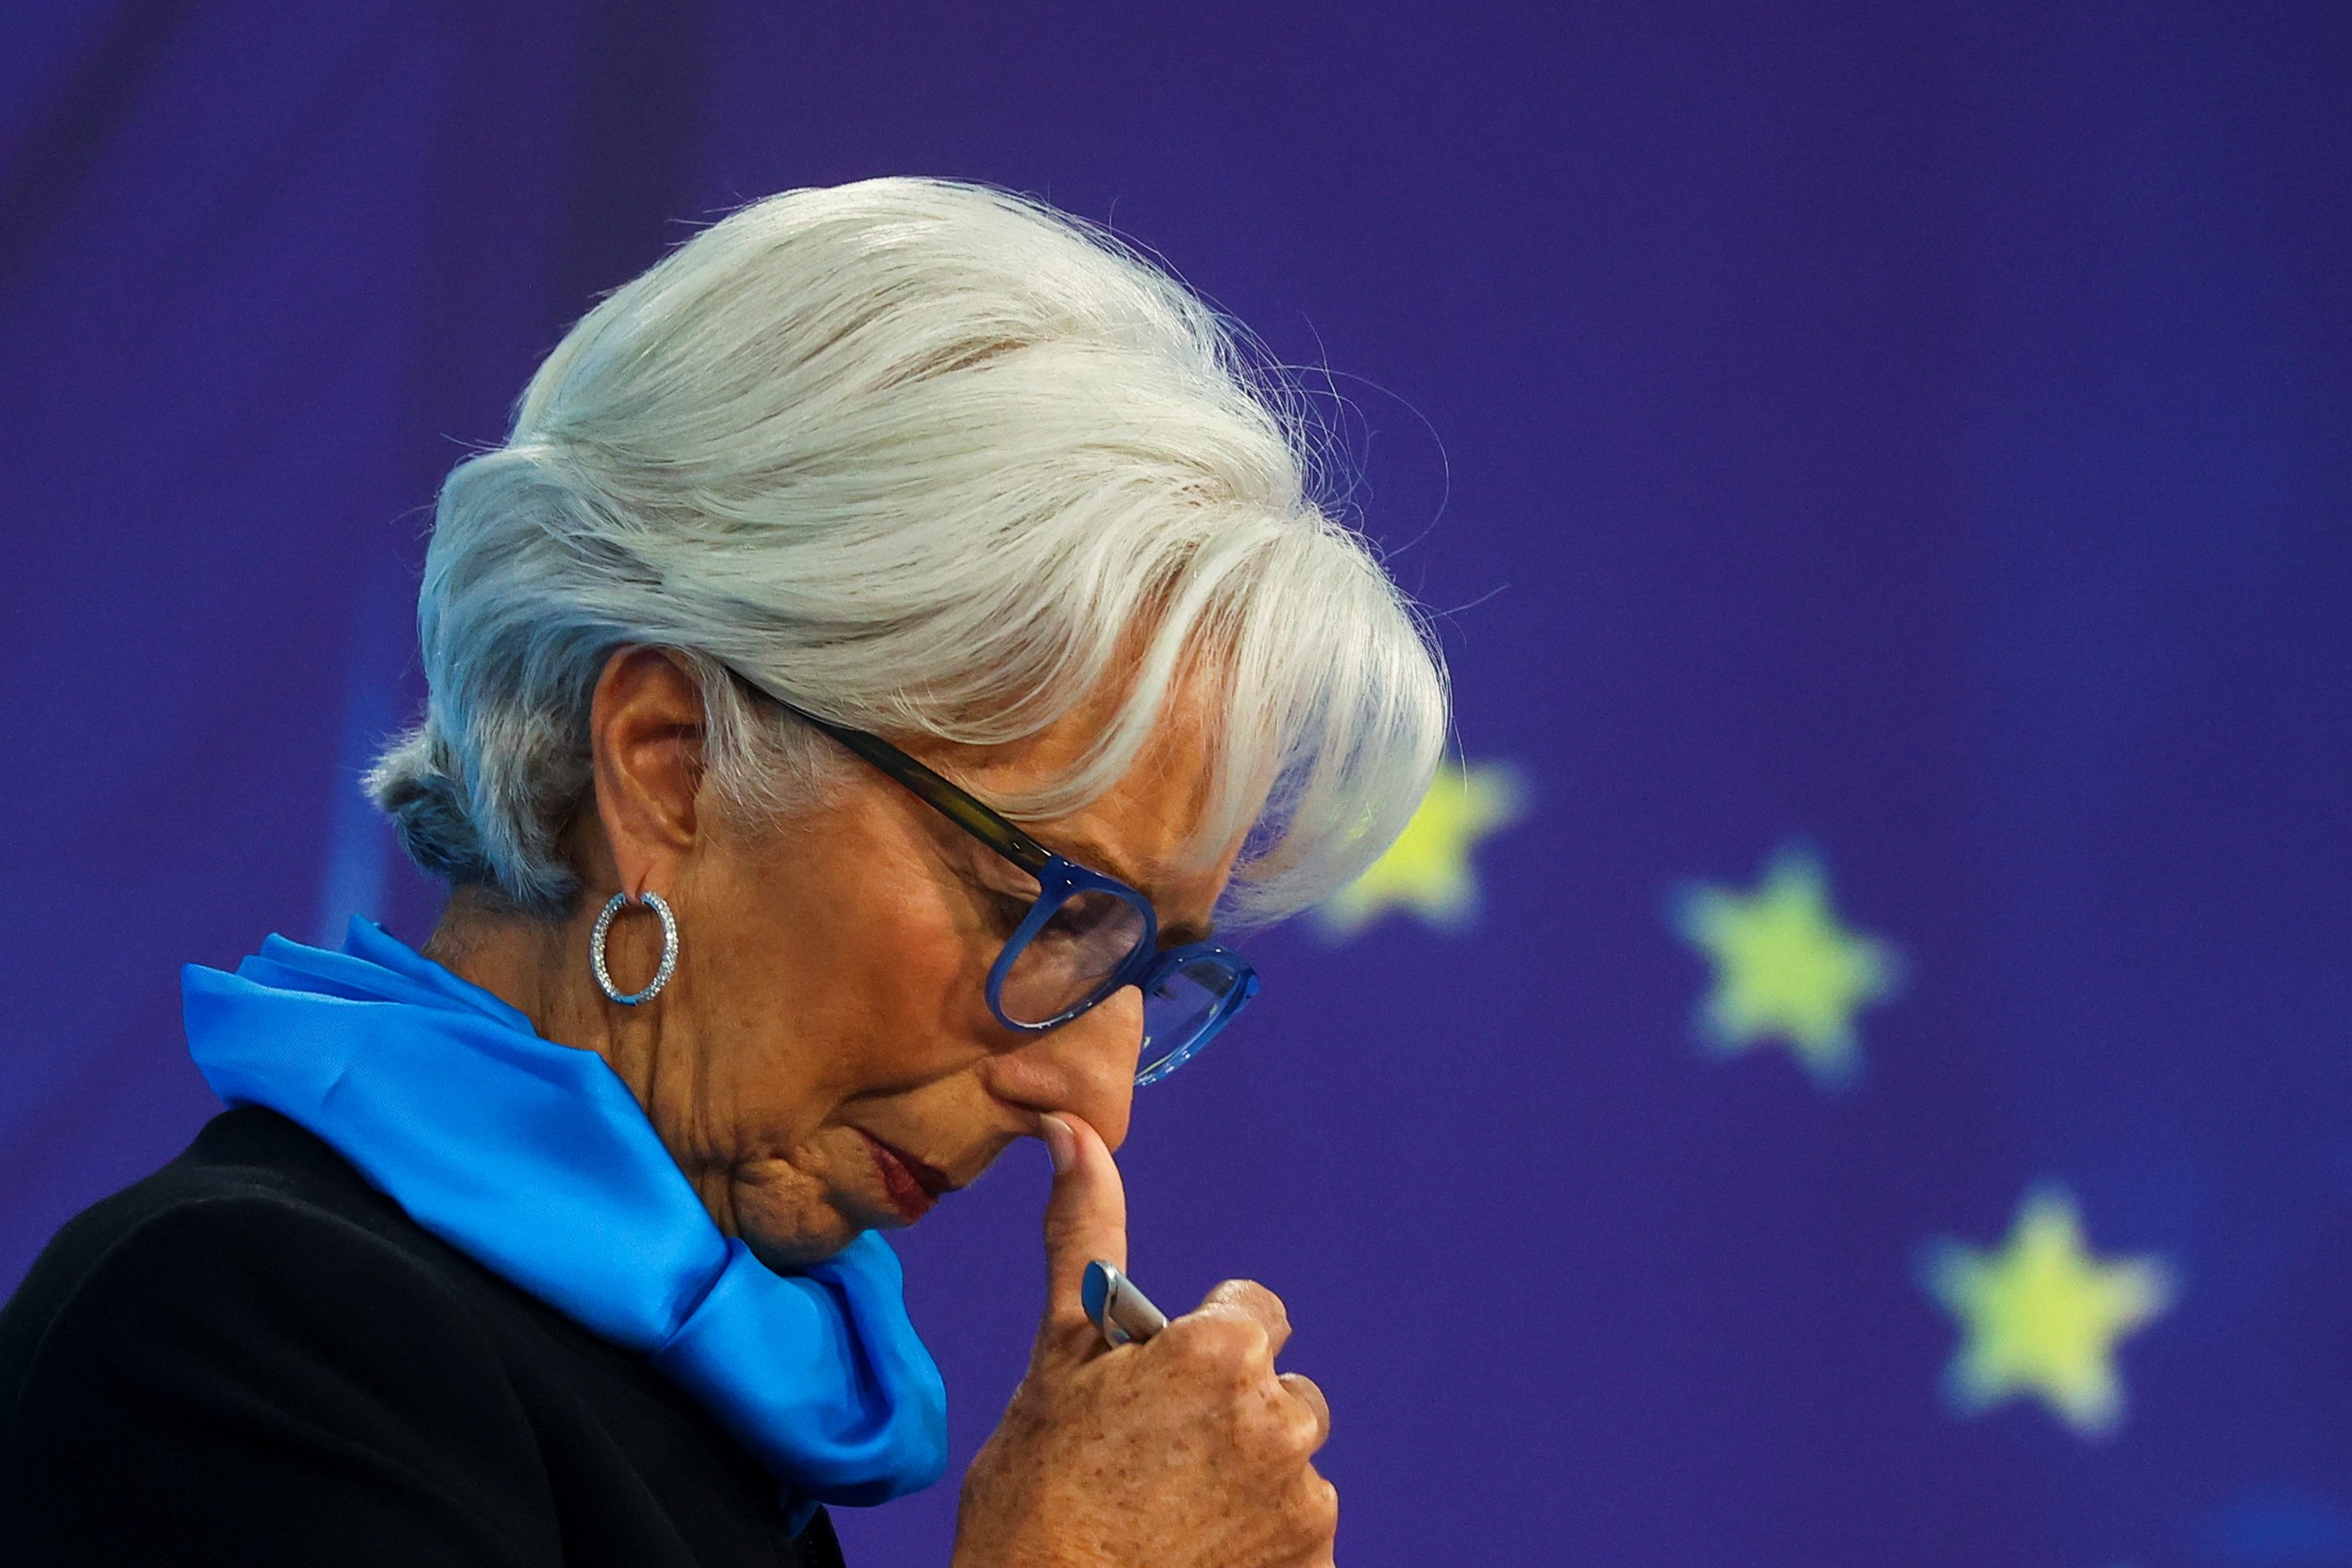 ECB’s Lagarde keeps pushing back on rate hike bets and hopes